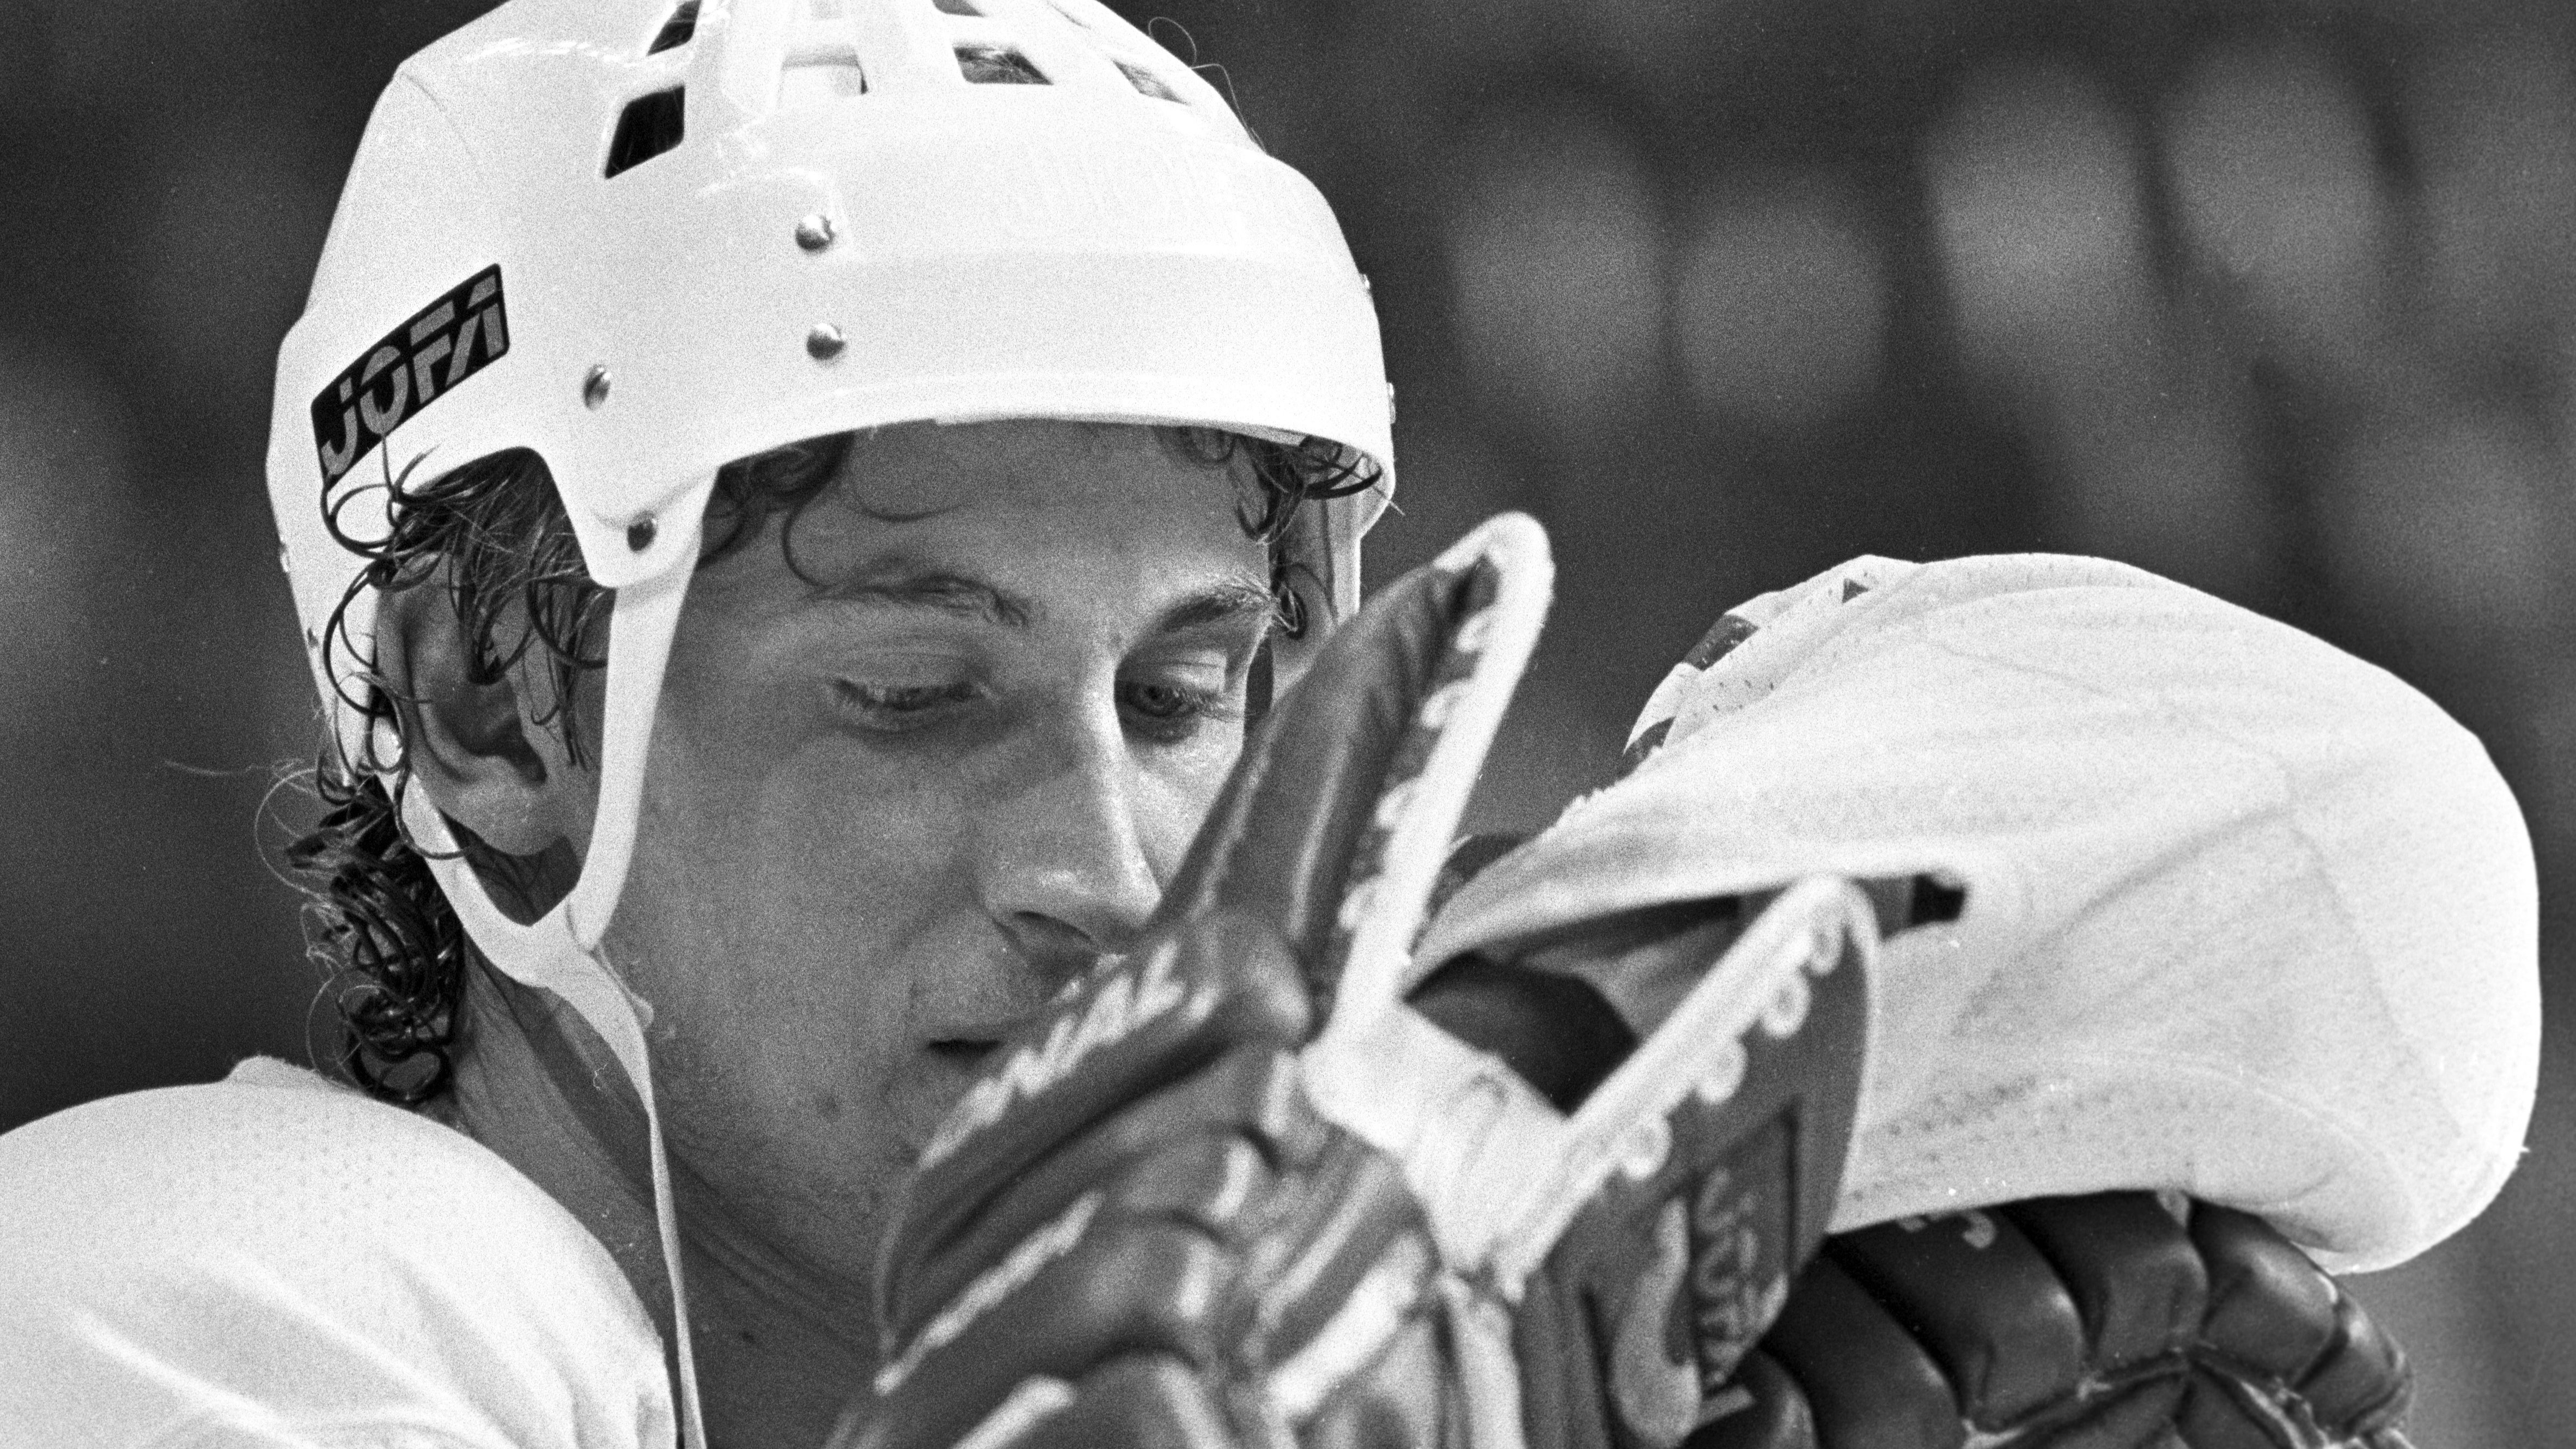 Gretzky's childhood stick sold for nearly 40K